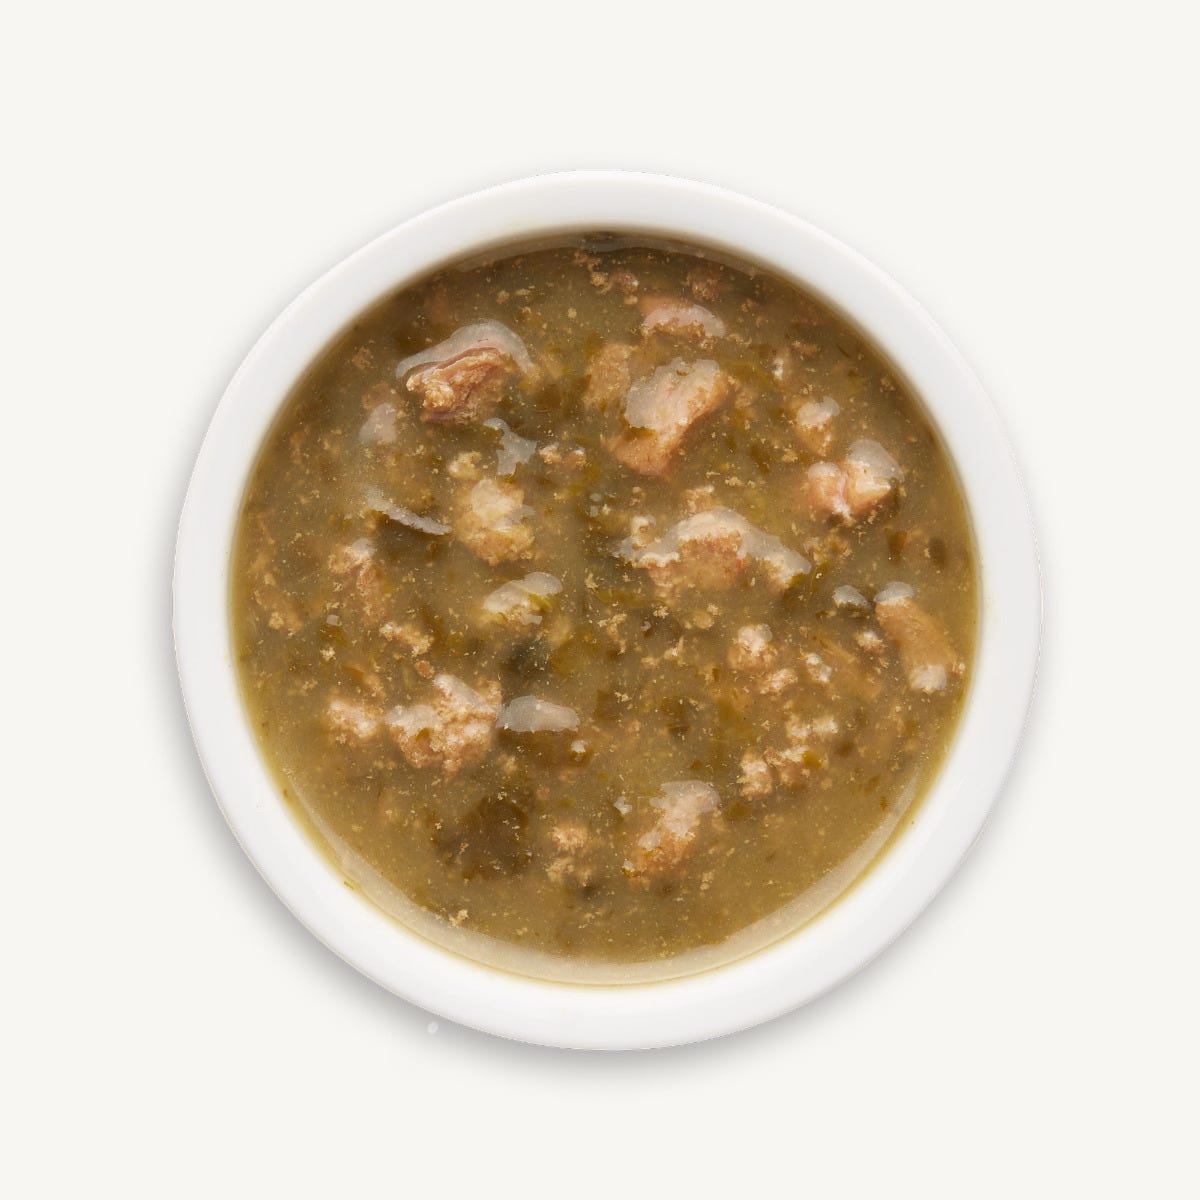 The Honest Kitchen Superfood Pour Overs Turkey Stew with Spinach, Kale, & Broccoli Dog Food